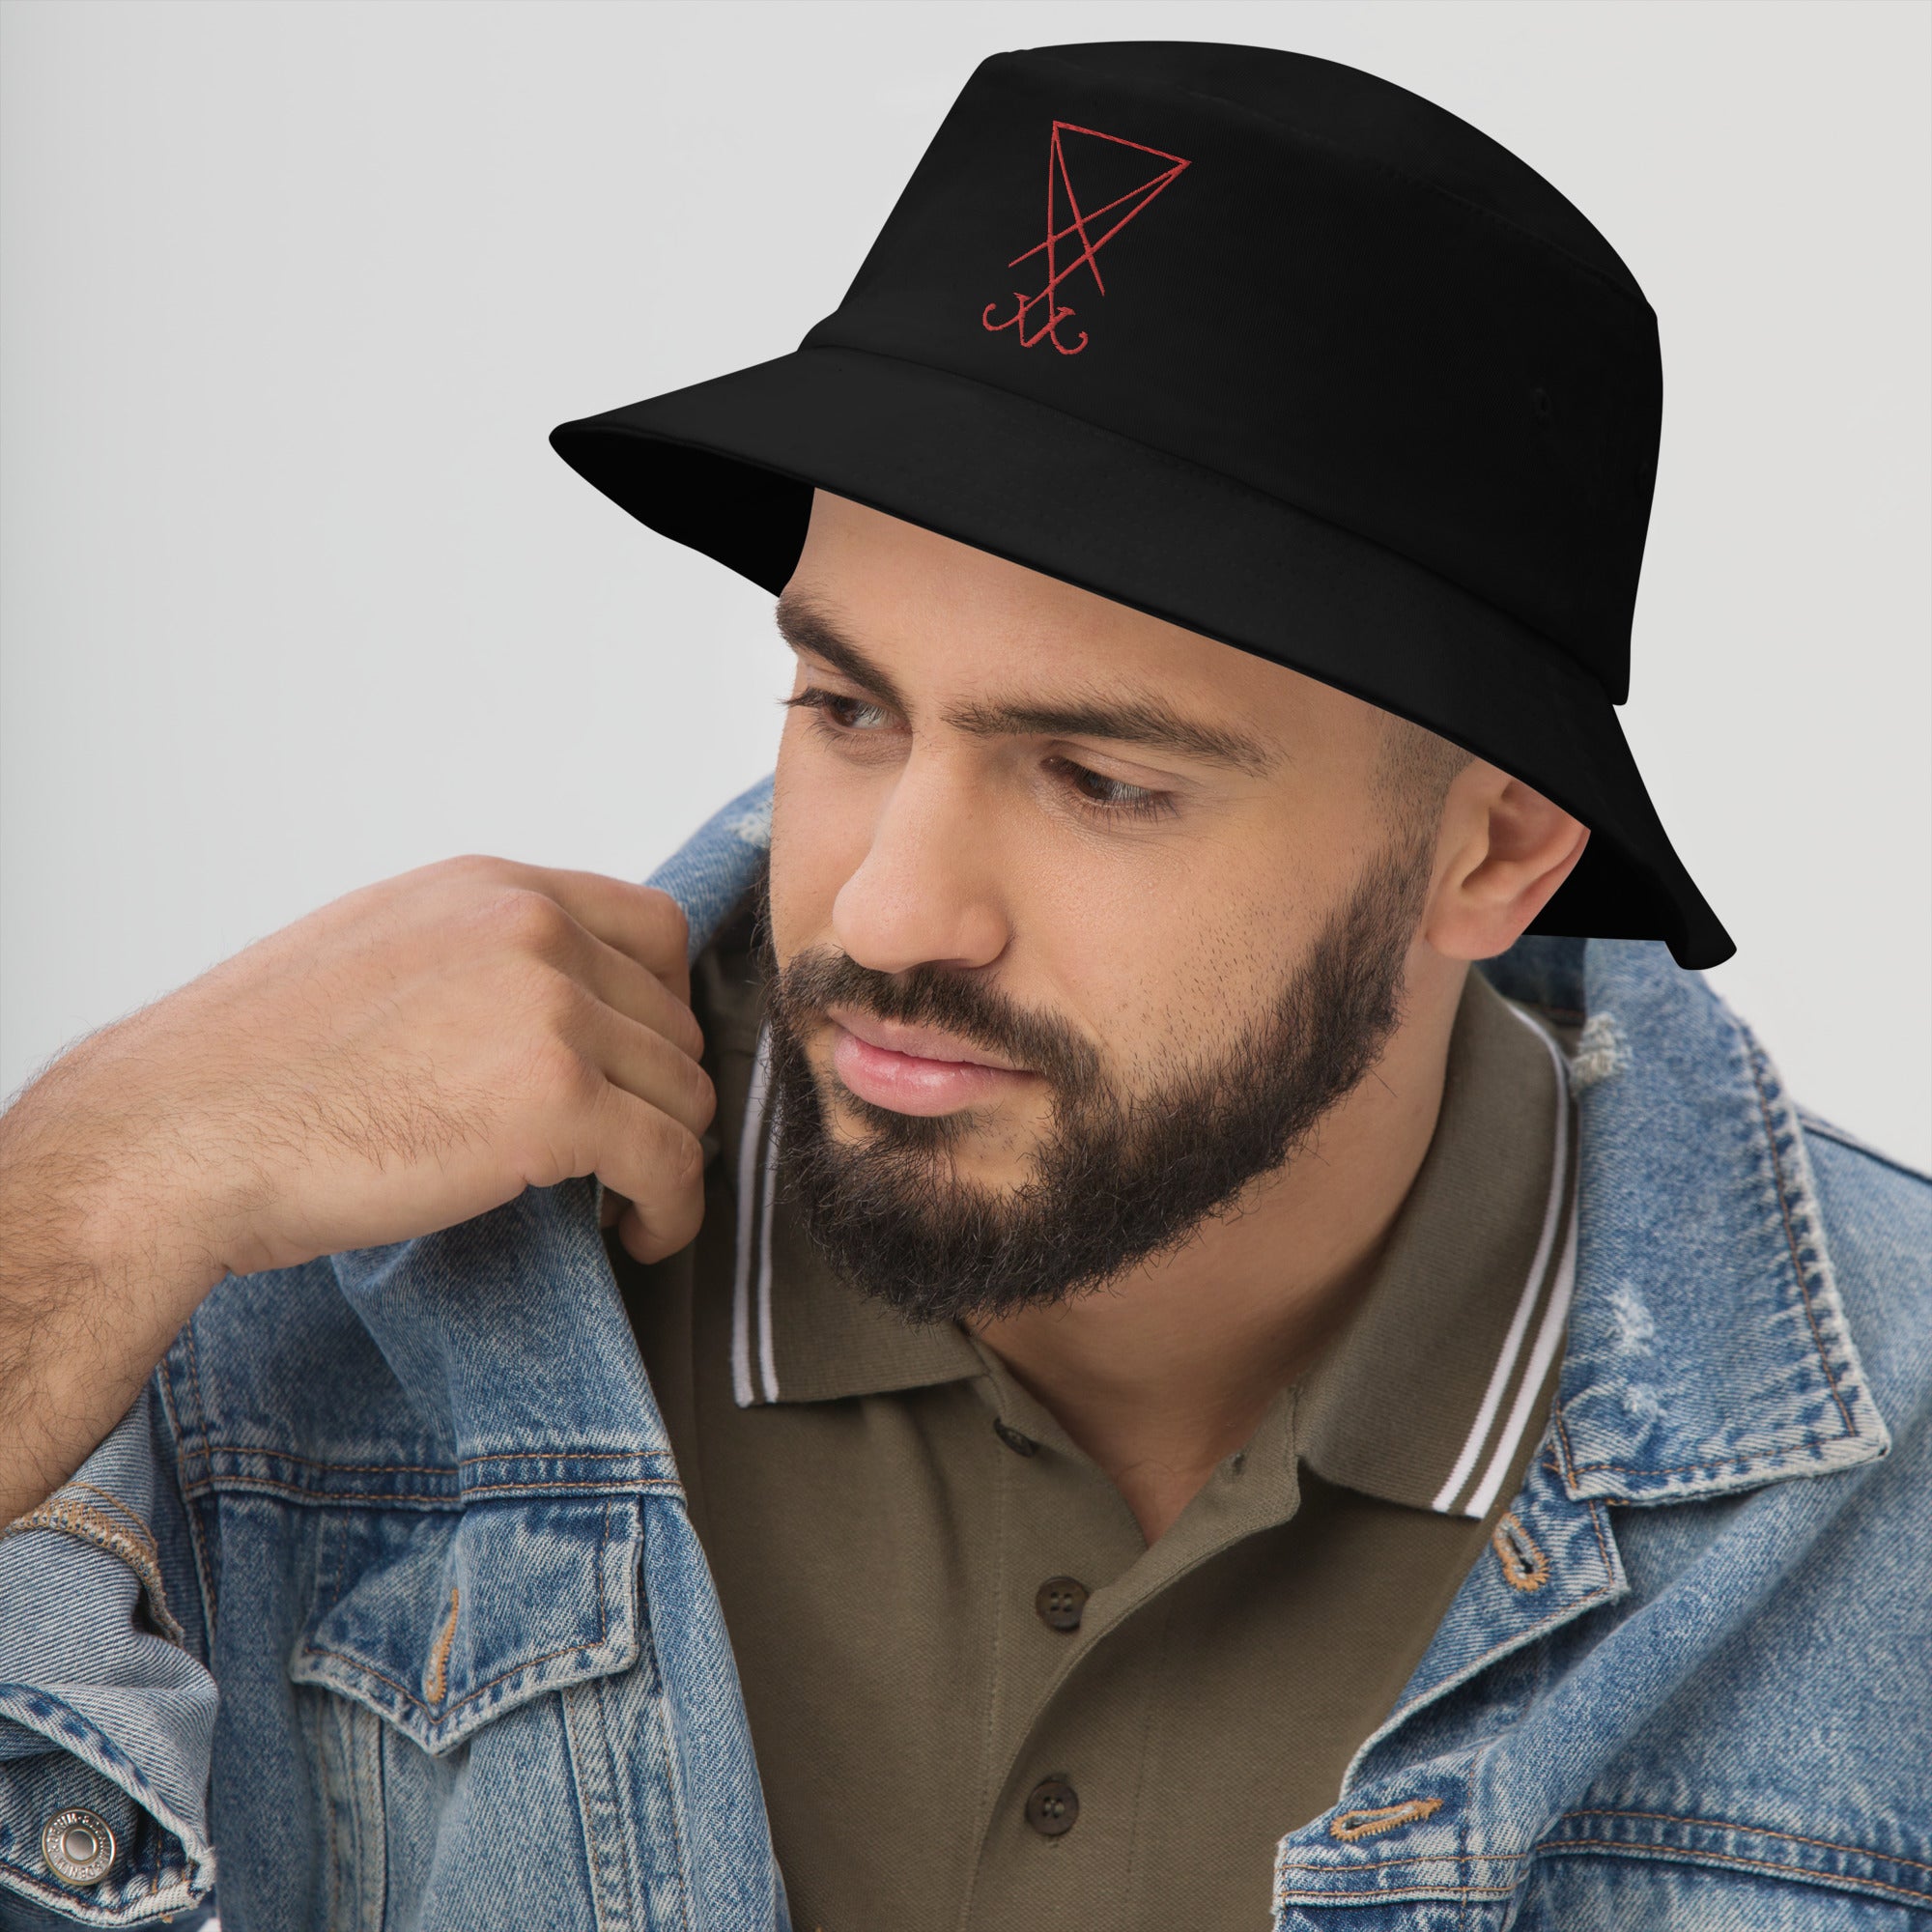 Red Sigil of Lucifer Symbol The Seal of Satan Embroidered Bucket Hat